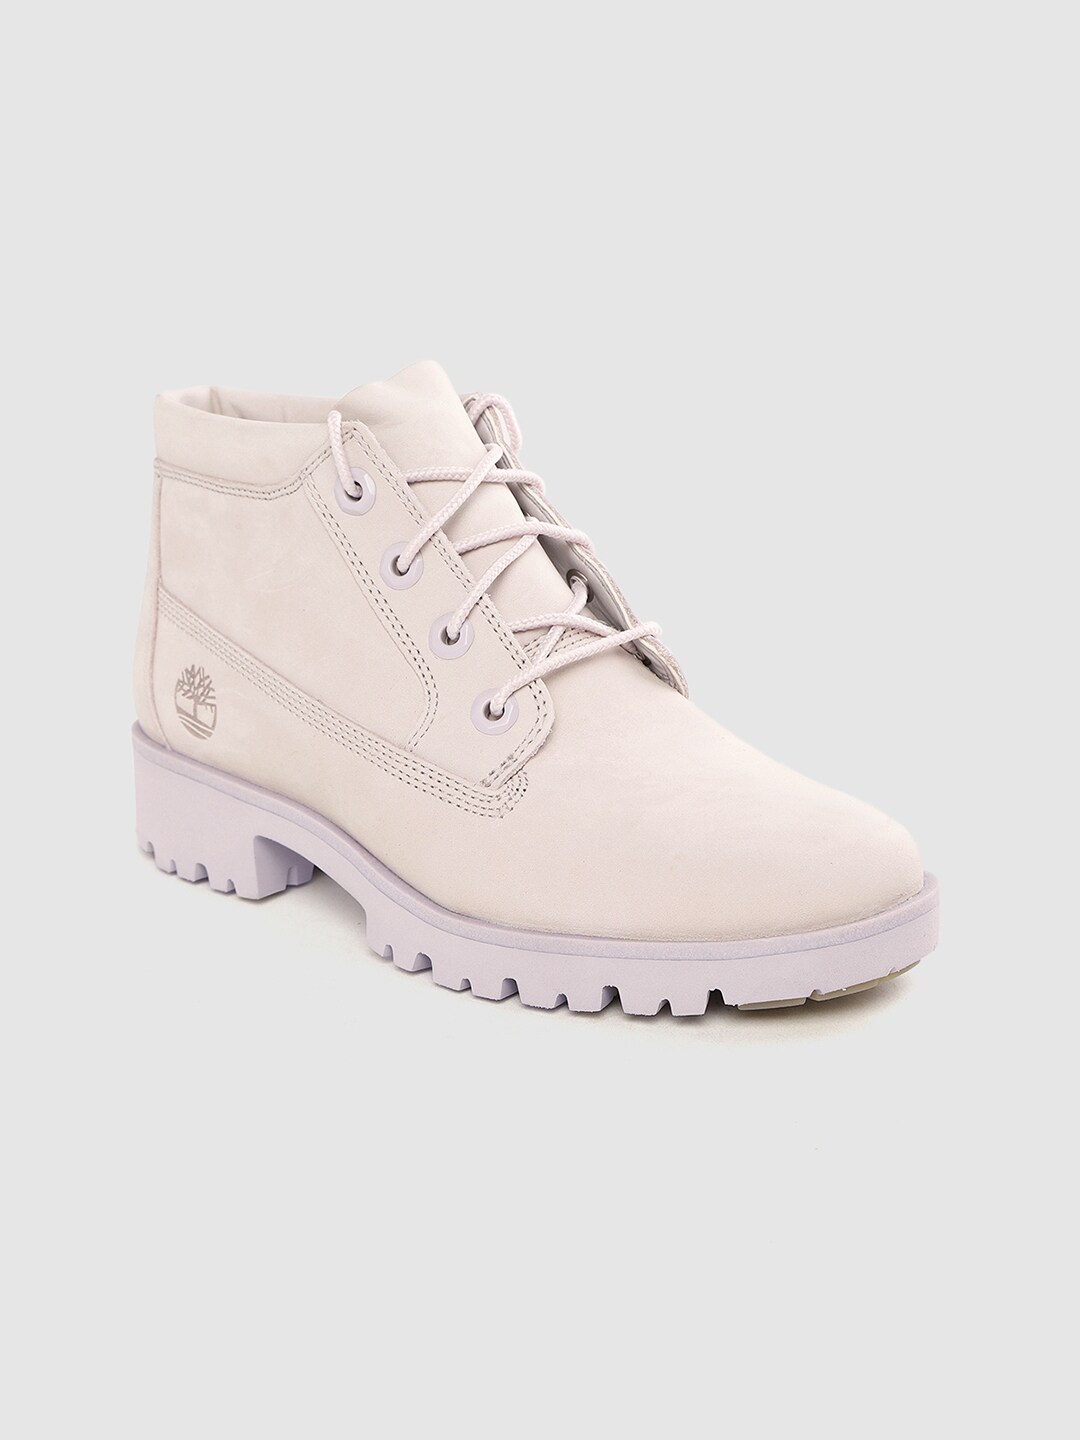 Timberland Women Lavneder Nubuck Leather Mid-Top Lite Nelie Chukka Boots Price in India